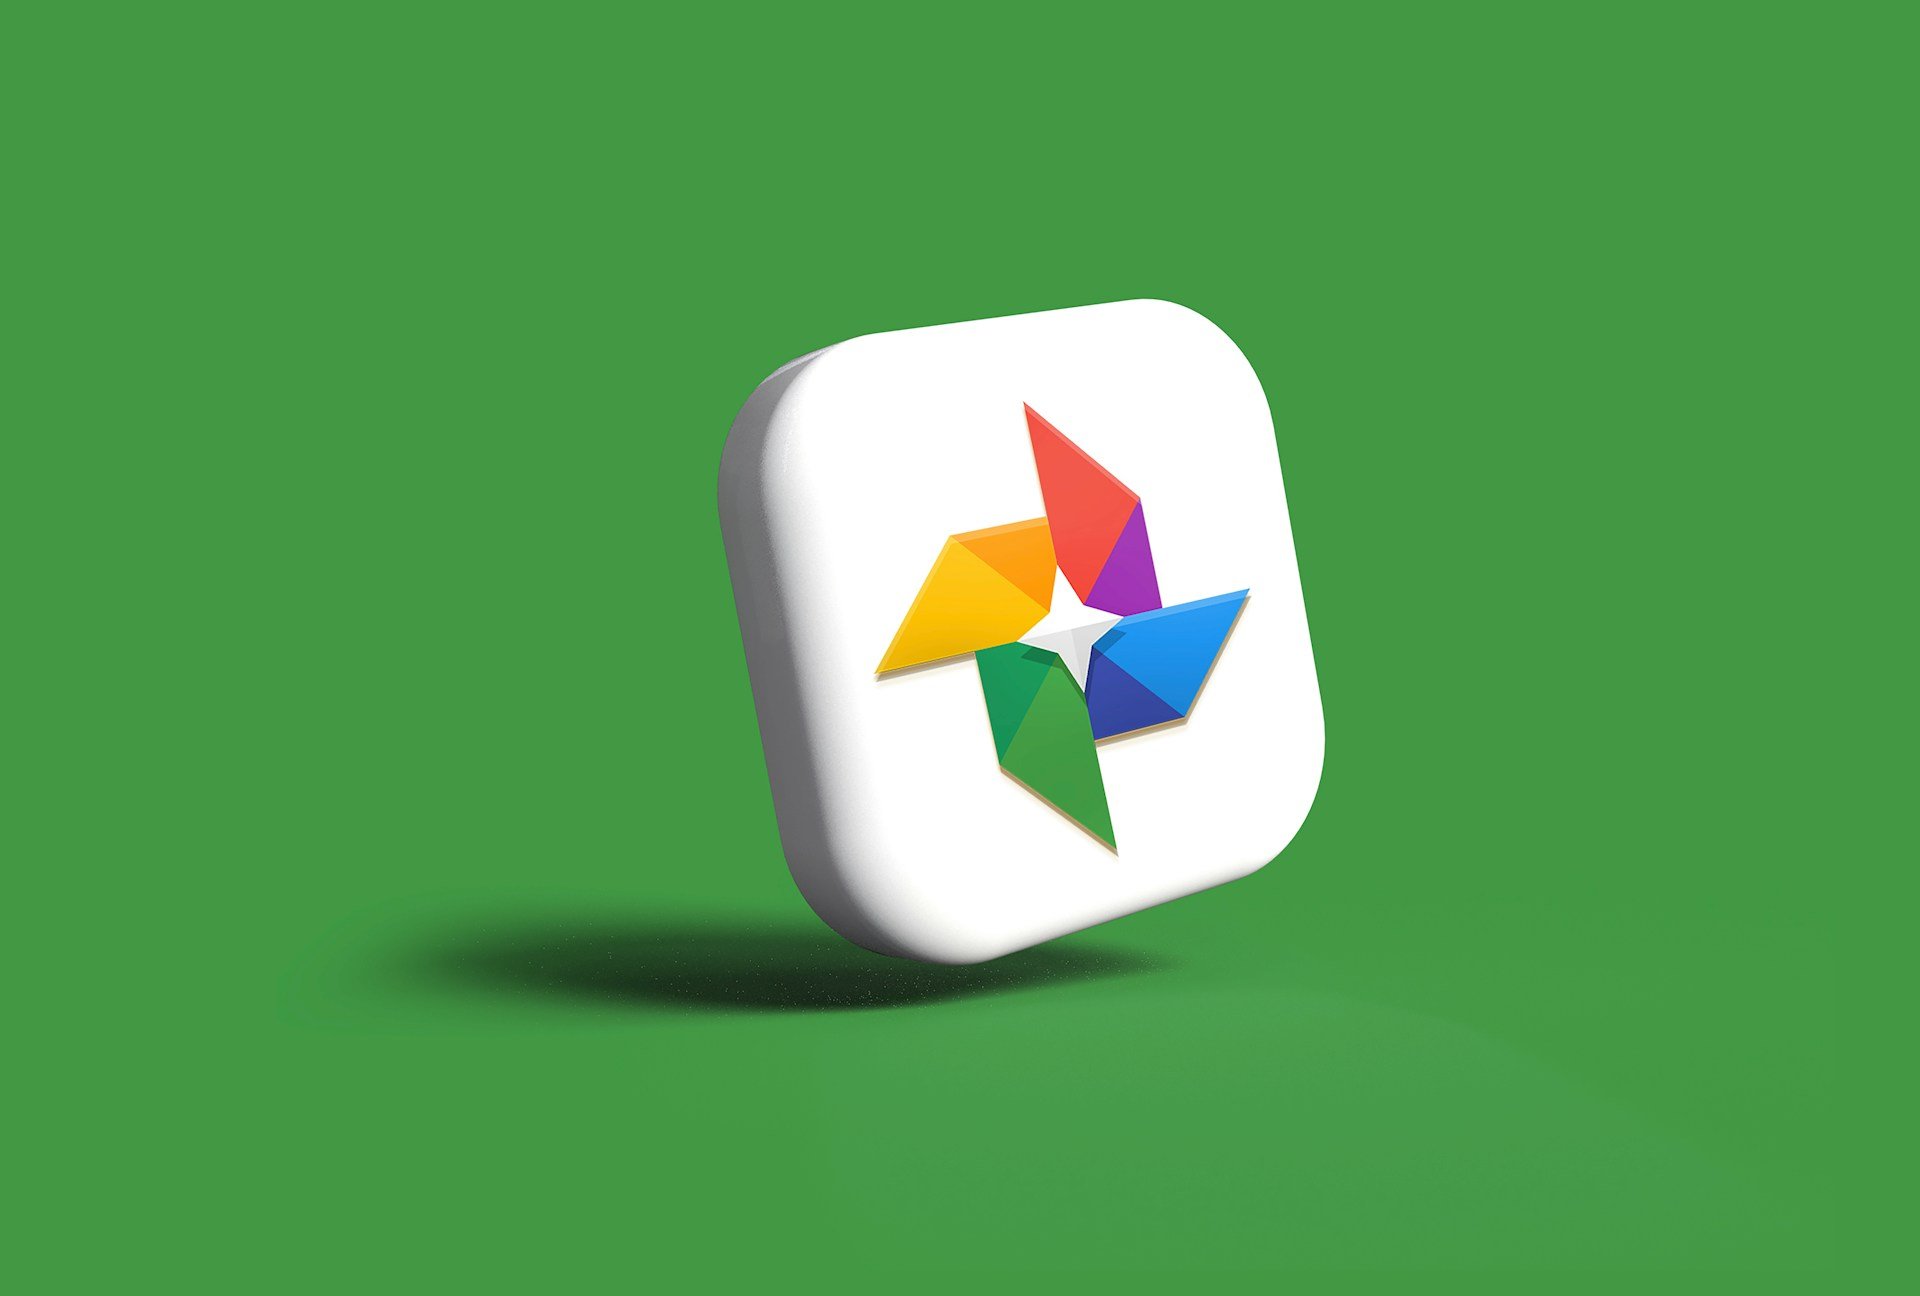 One-tap video enhancements: This Google Photos feature will make you a pro at editing